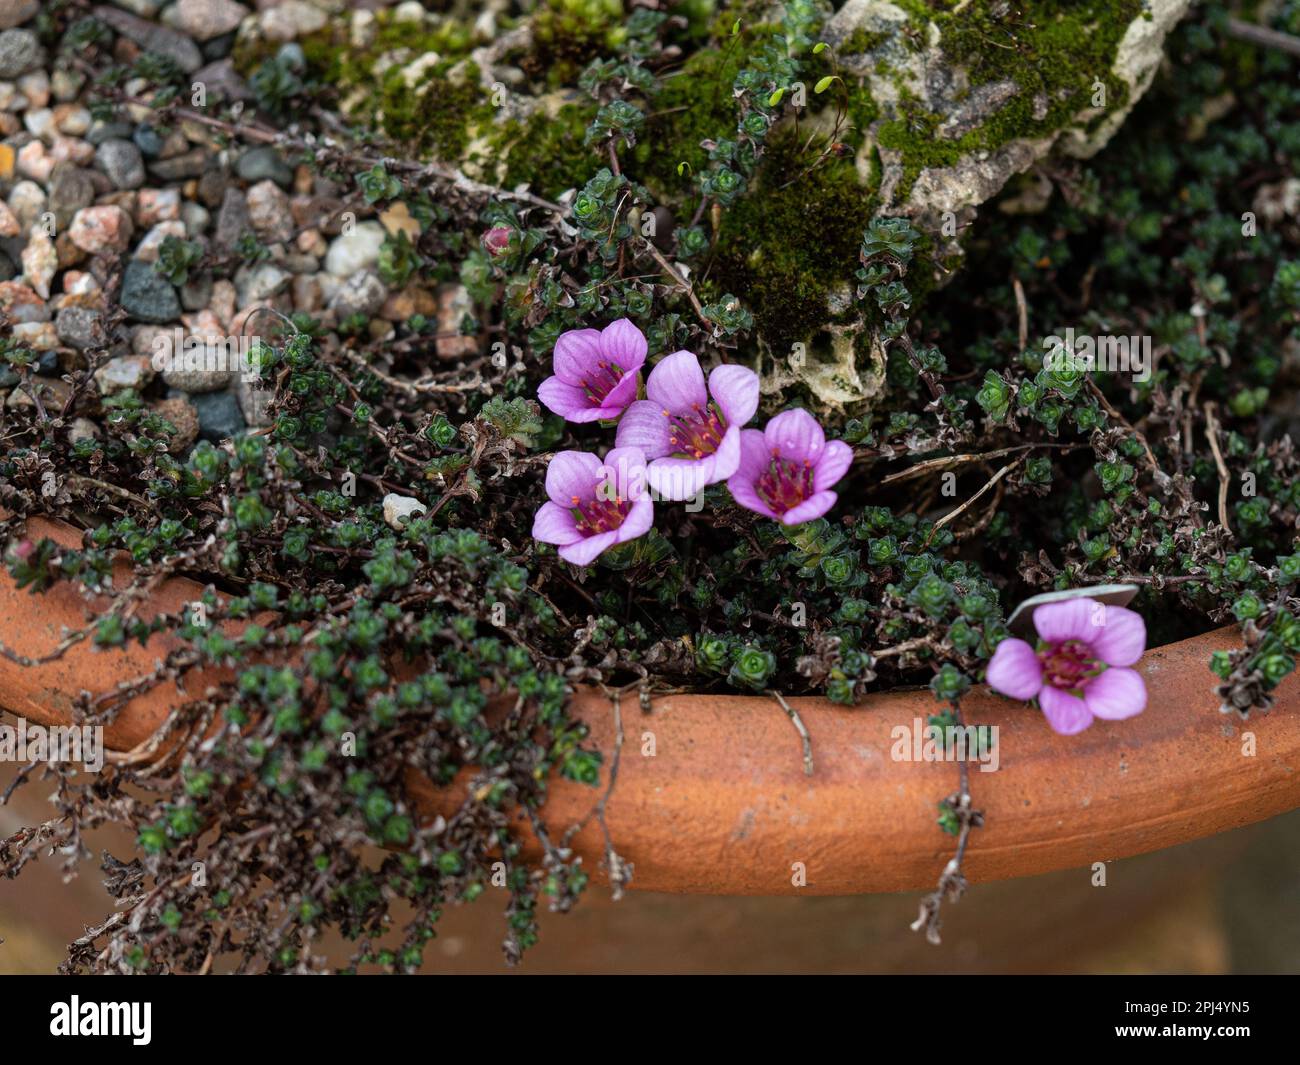 The deep pink early spring flowers of Saxifraga oppositifolia 'Latina' at the edge of a terracotta pan. Stock Photo